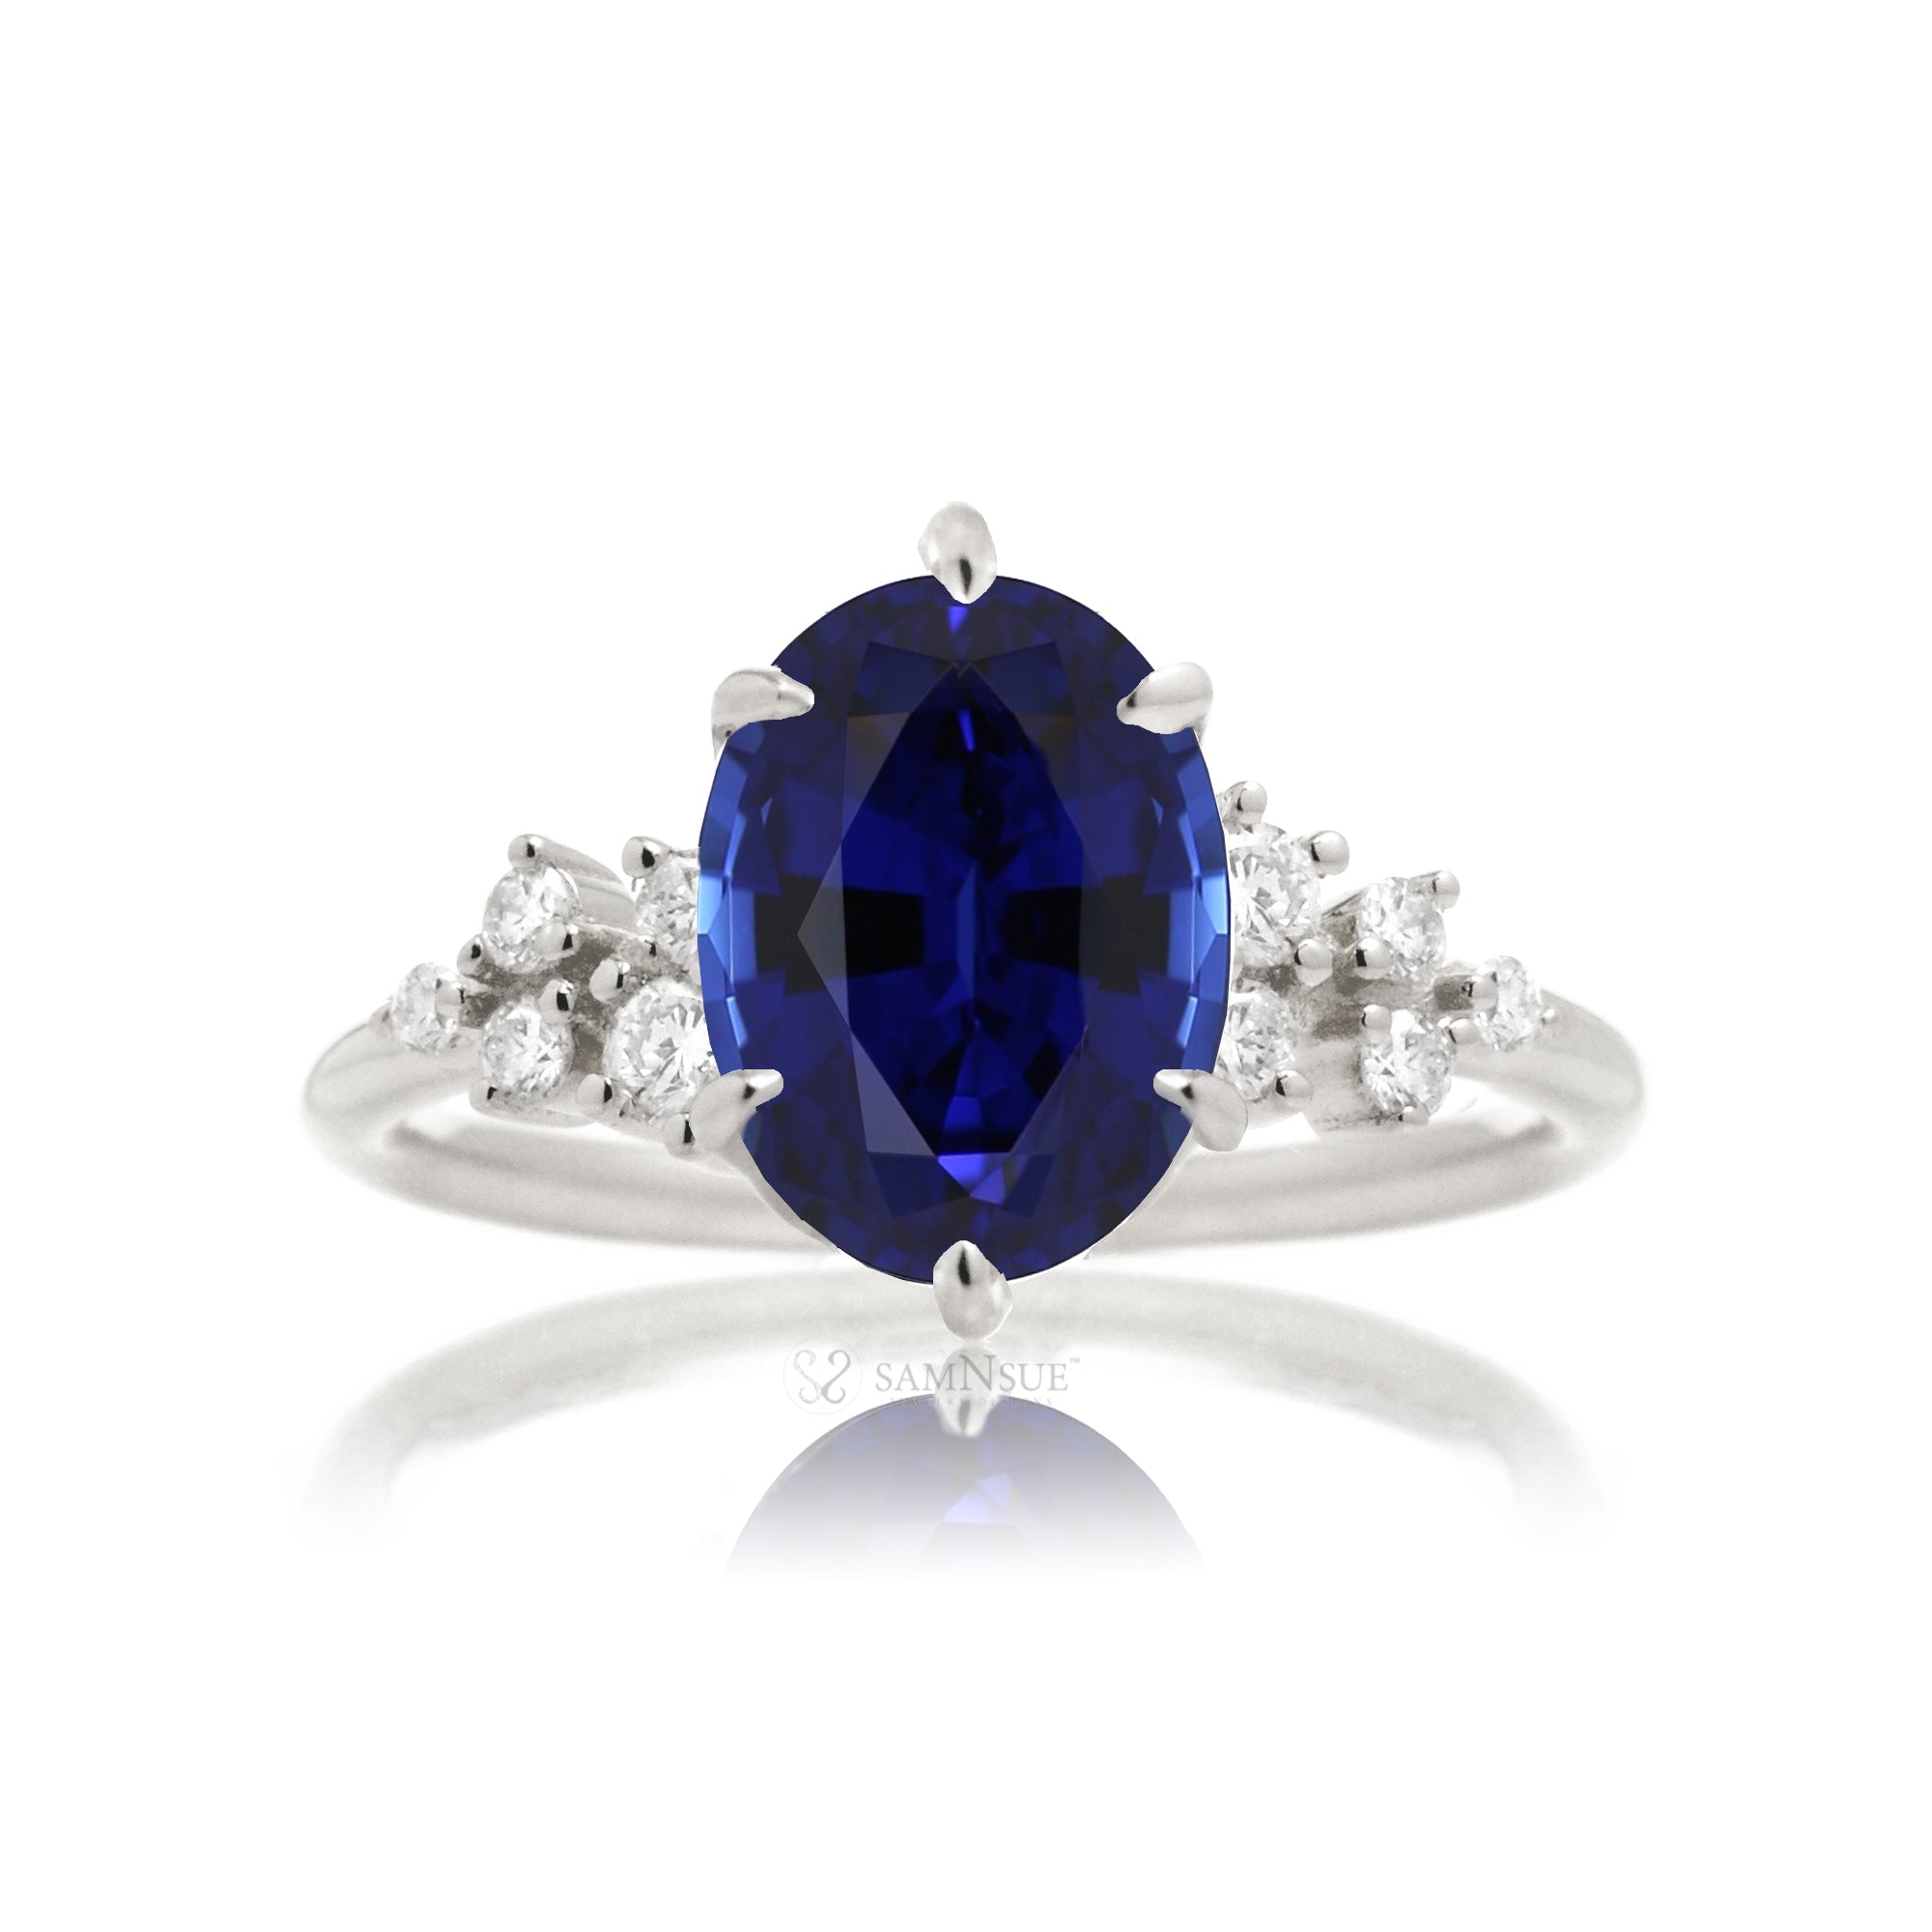 Blue sapphire oval cut solitaire engagement ring in white gold